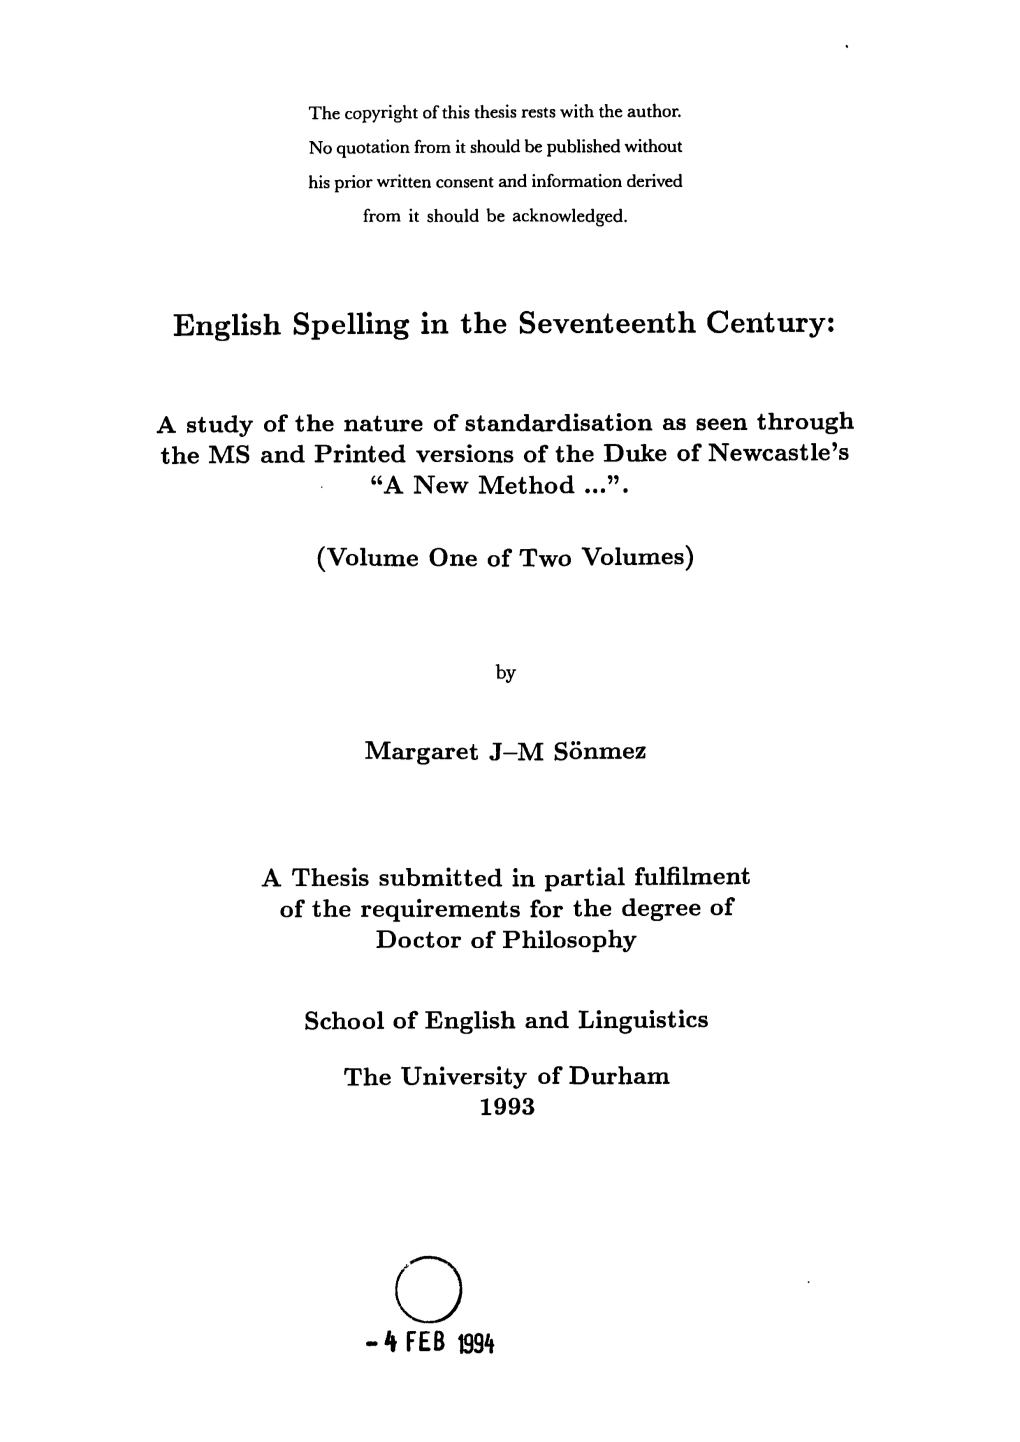 English Spelling in the Seventeenth Century